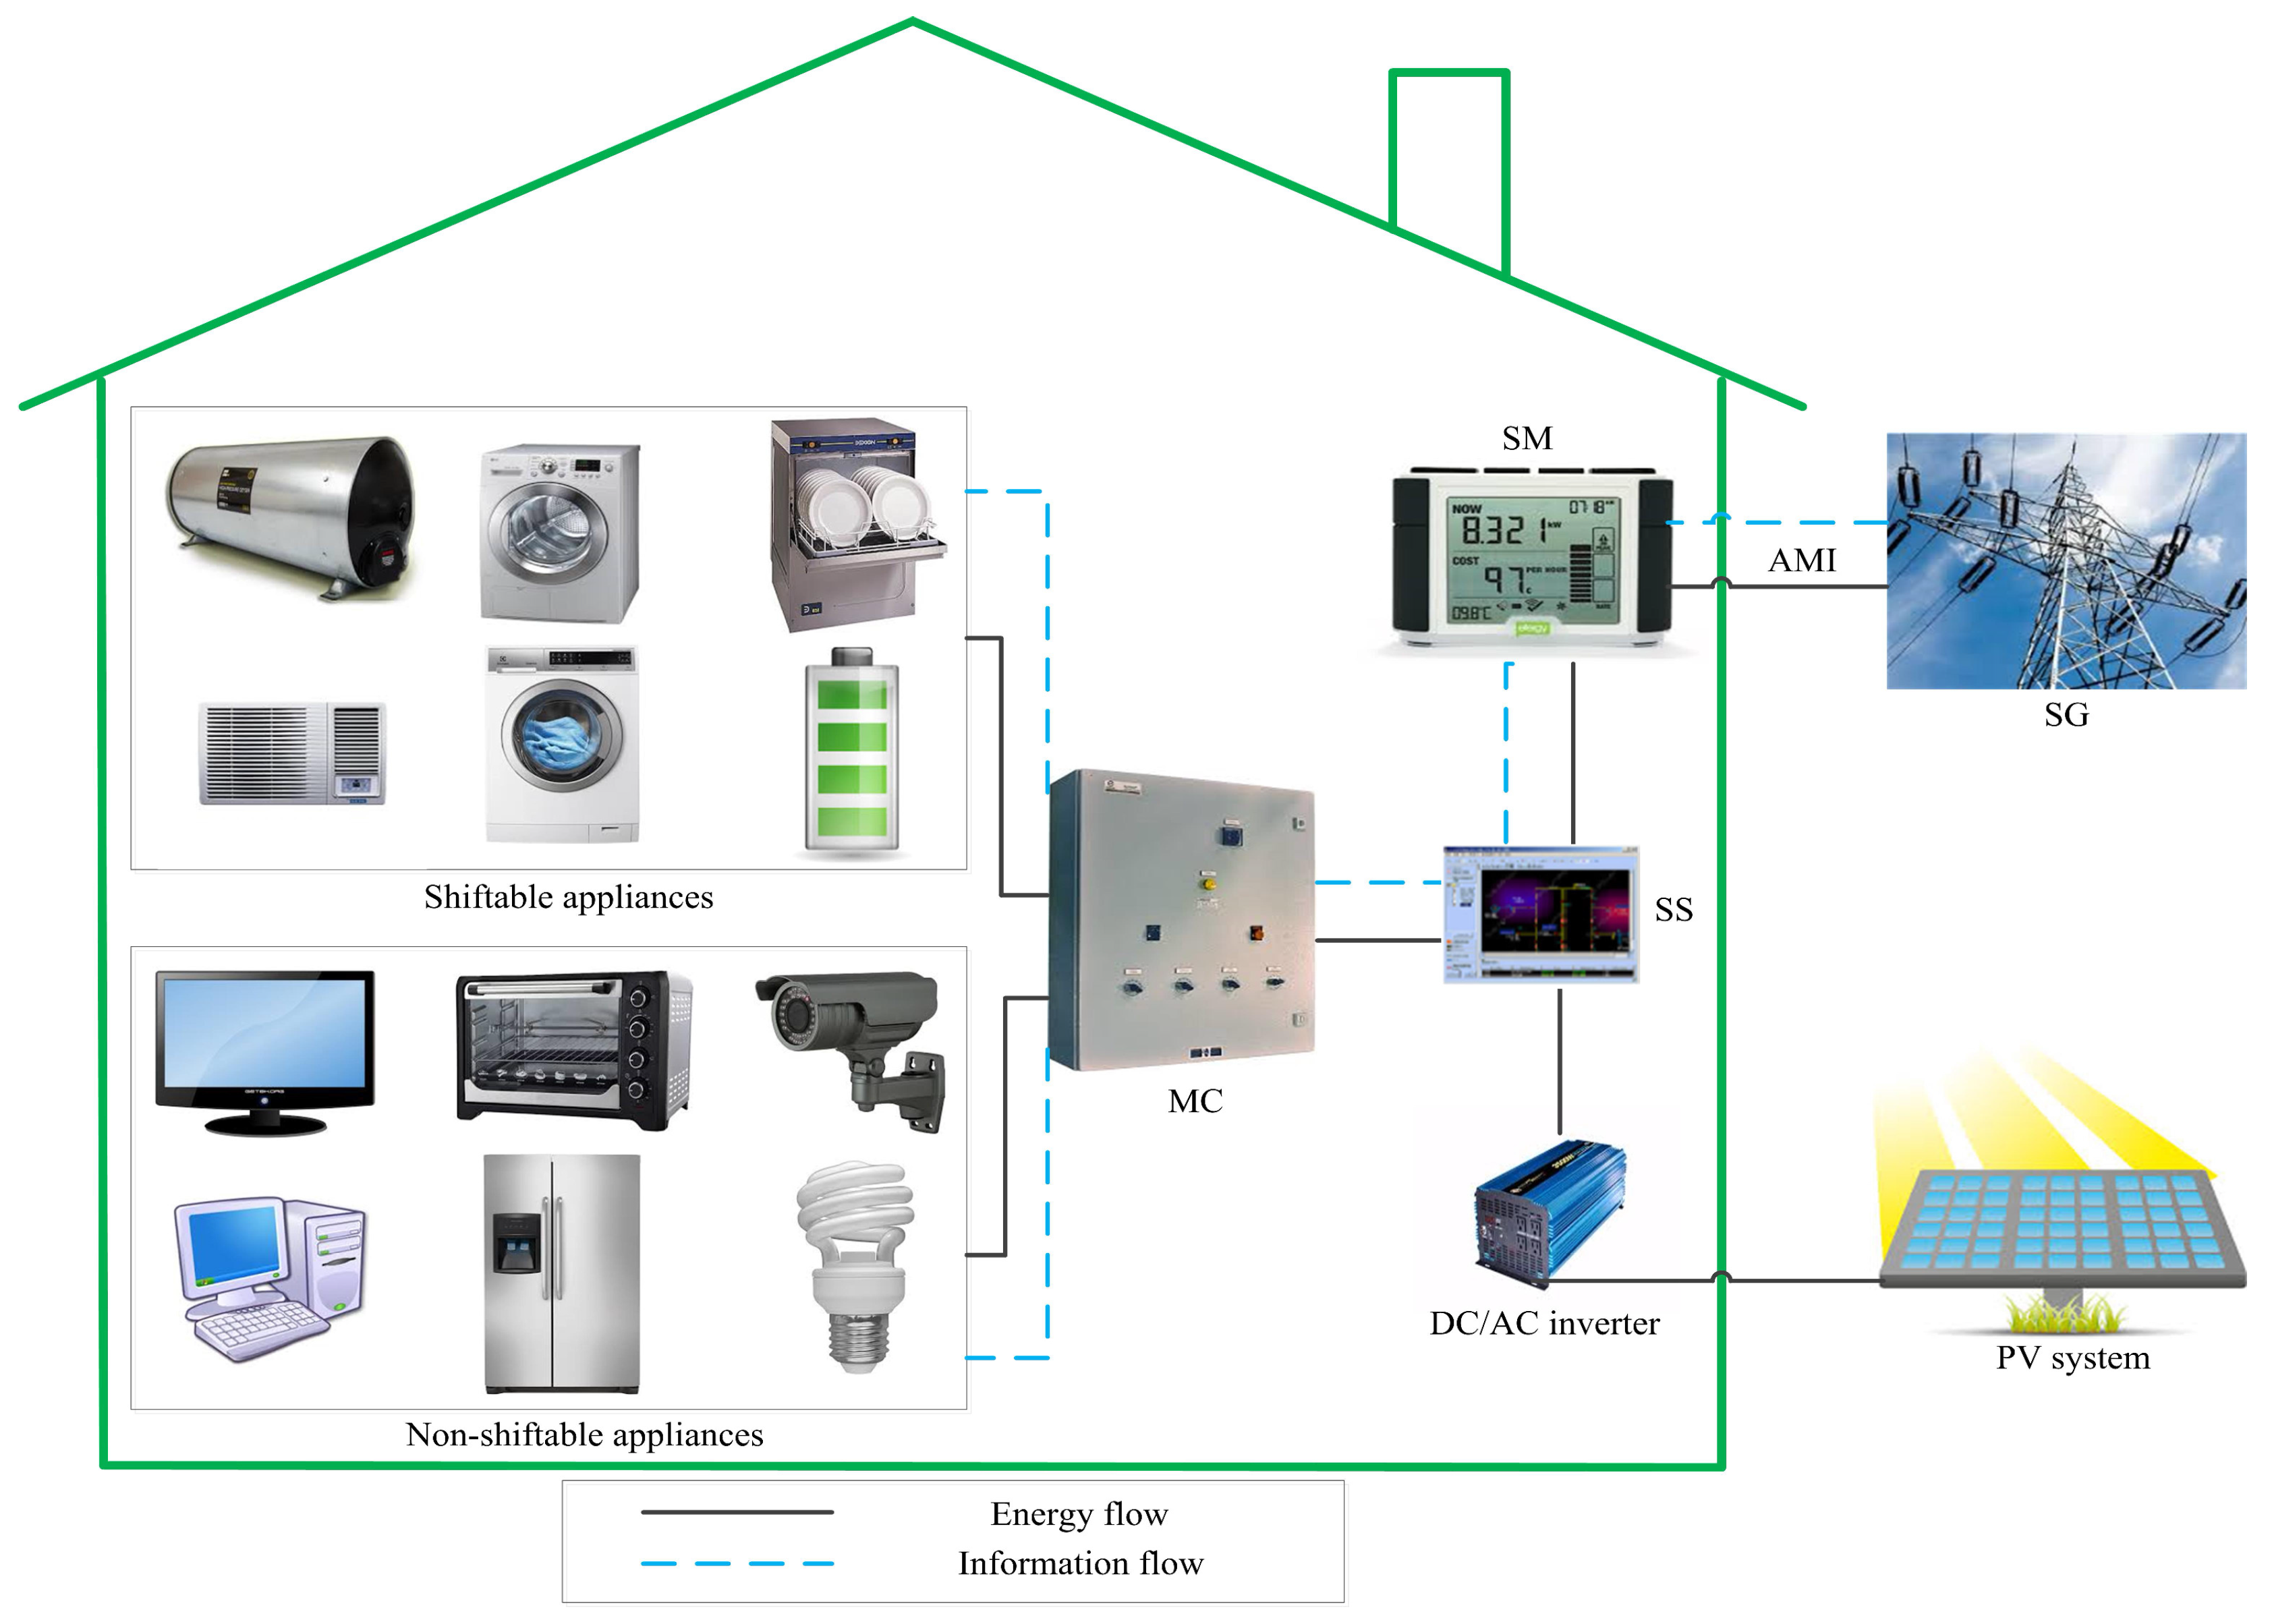 Energies | Free Full-Text | An Optimized Home Energy Management System